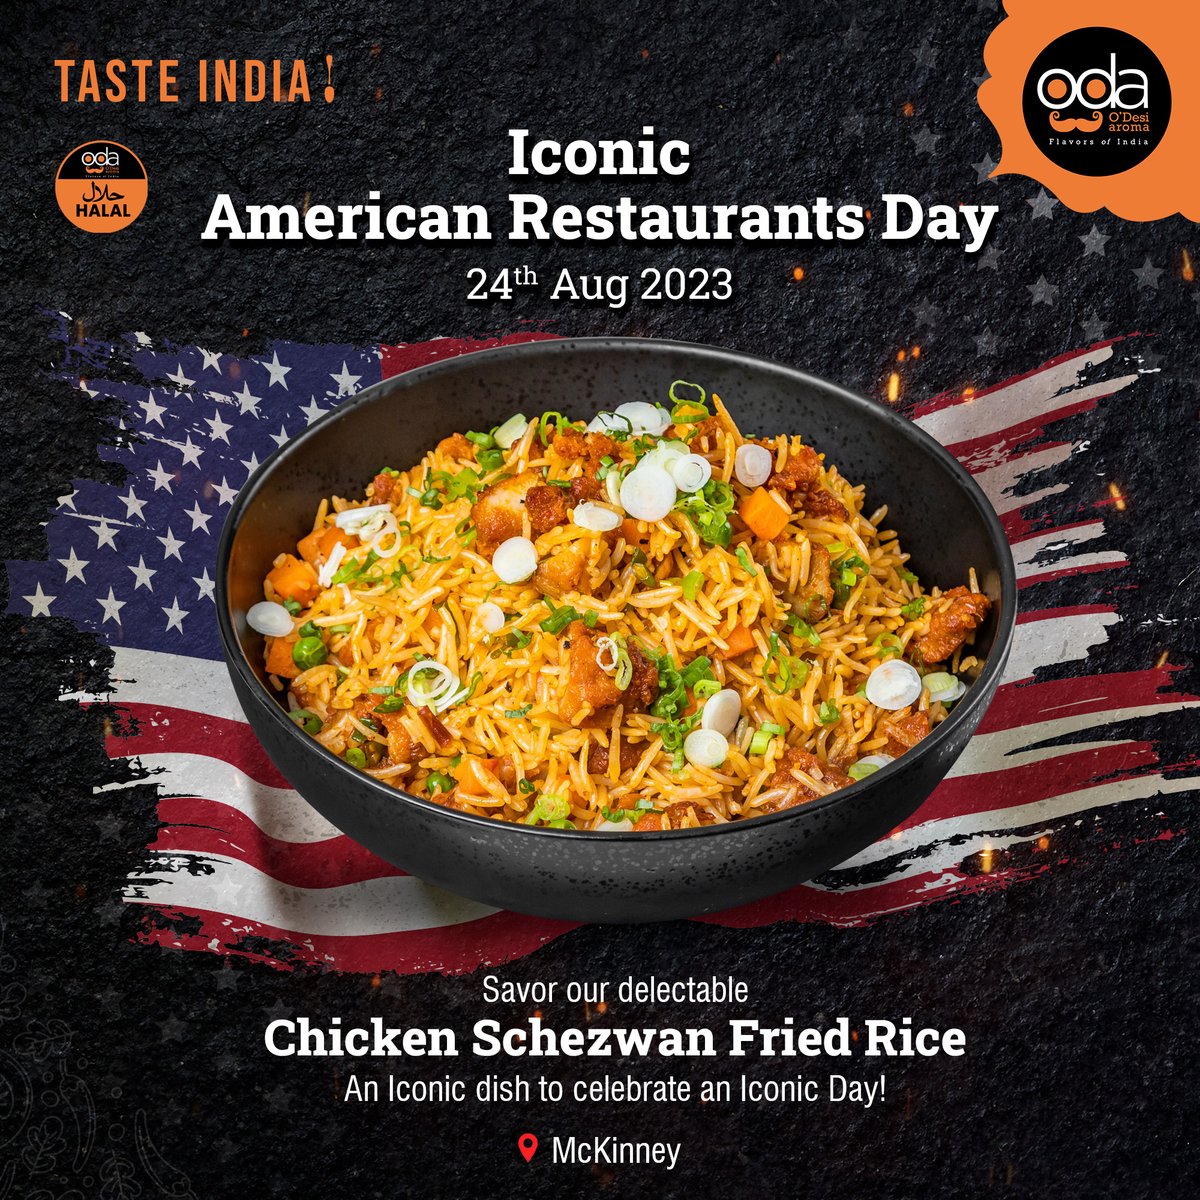 Celebrate this iconic day with an iconic dish at O'Desi aroma!
Savor our delectable Chicken Schezwan Fried Rice at our McKinney store.🥘
Happy Iconic American Restaurants Day!

#ODesiAroma #TasteIndia #americanrestaurantsday #indianfoodlovers #indianfood #TasteIndia #dallas